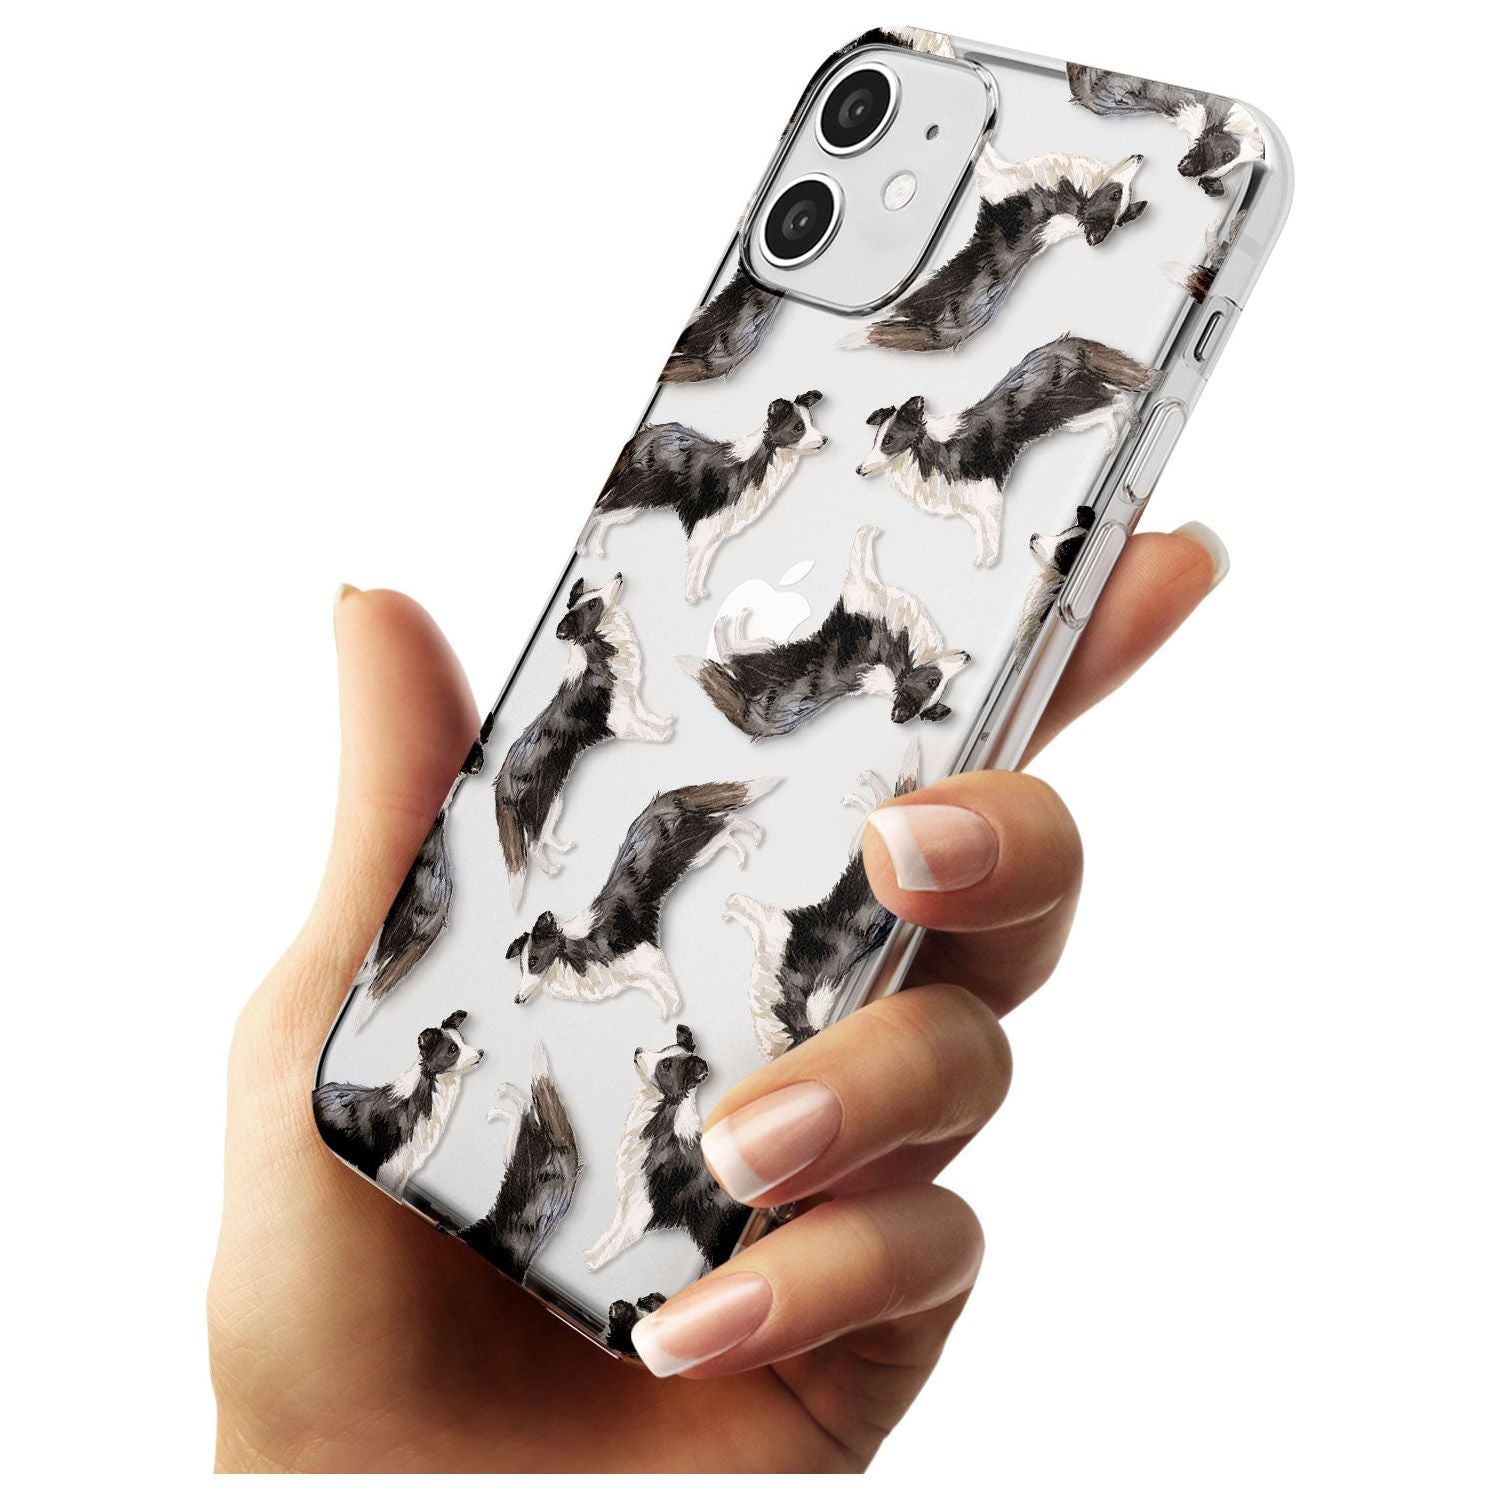 Border Collie Watercolour Dog Pattern Slim TPU Phone Case for iPhone 11